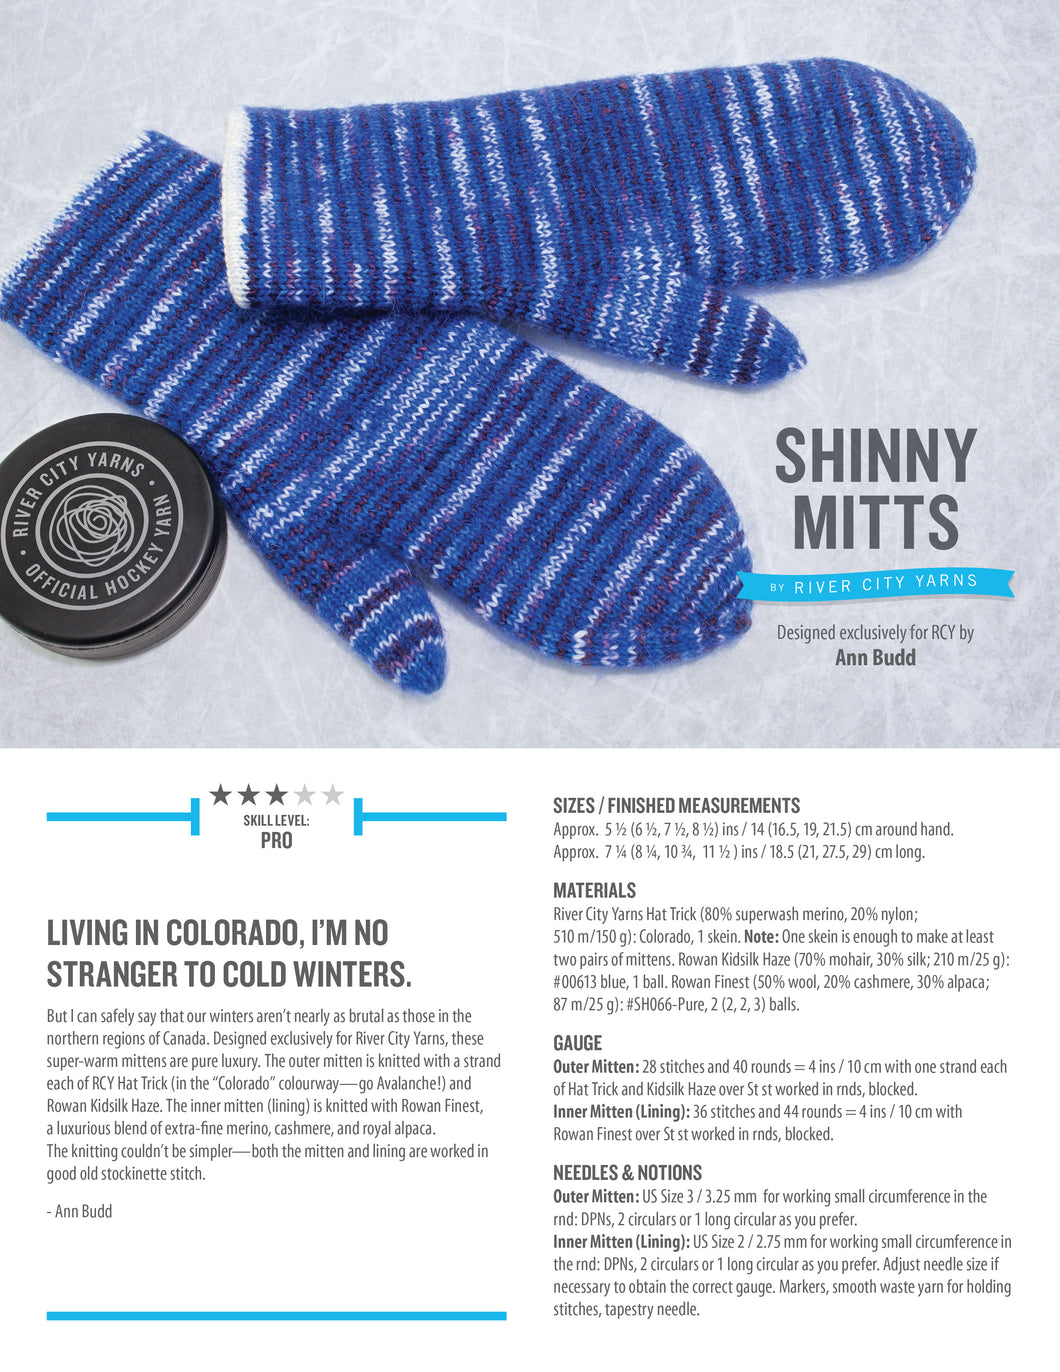 The cover page of the Shinny Mitts pattern